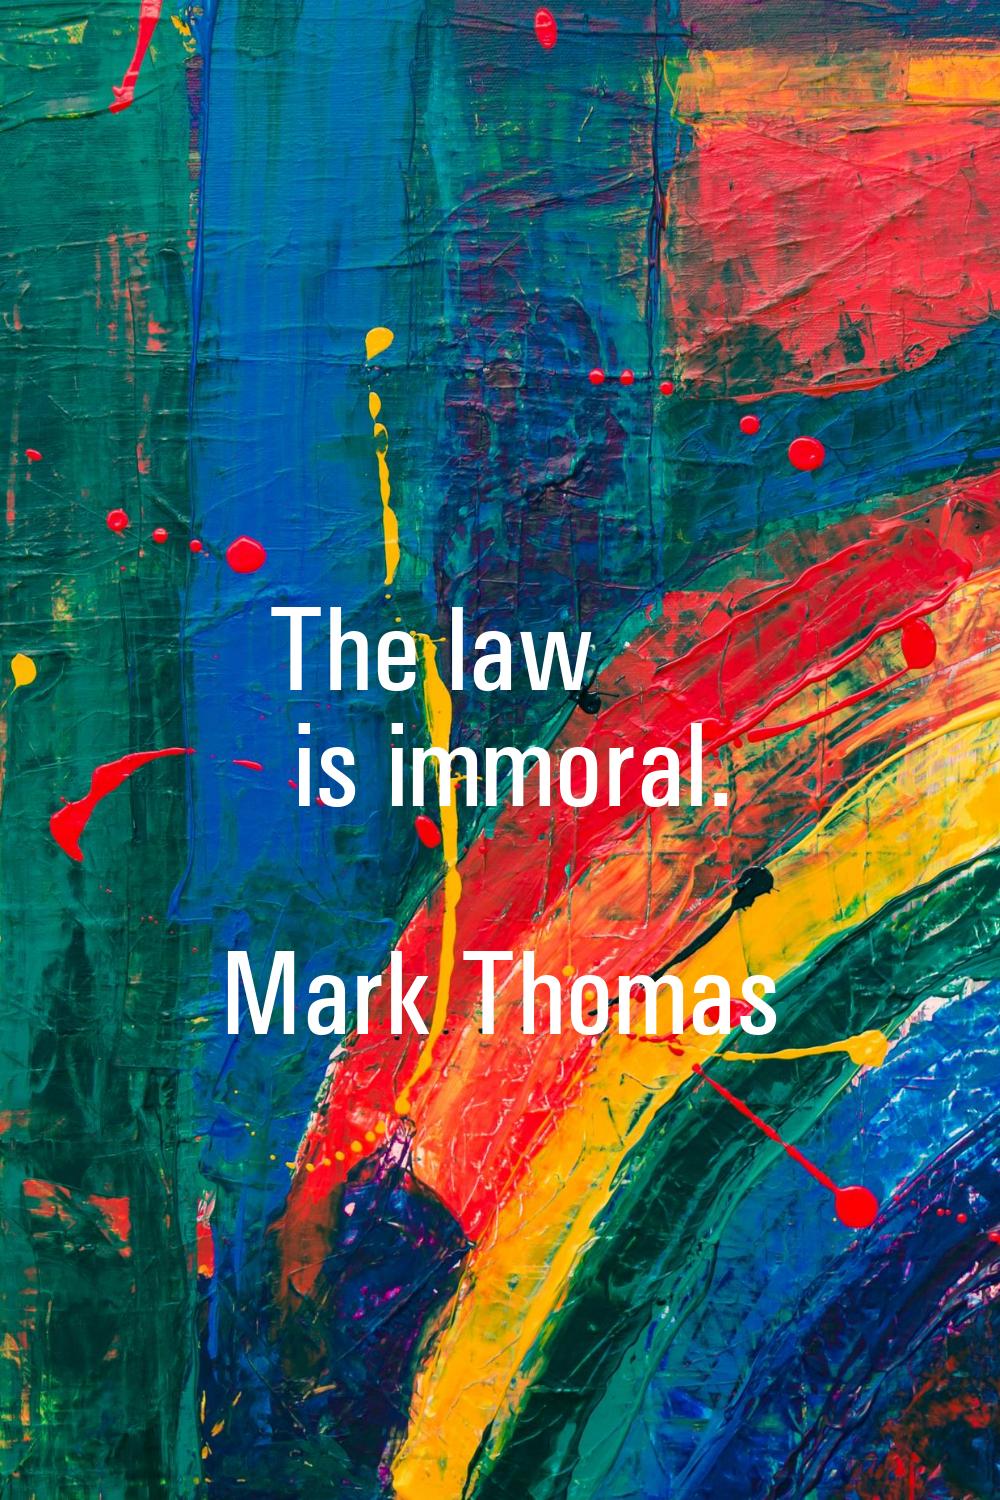 The law is immoral.